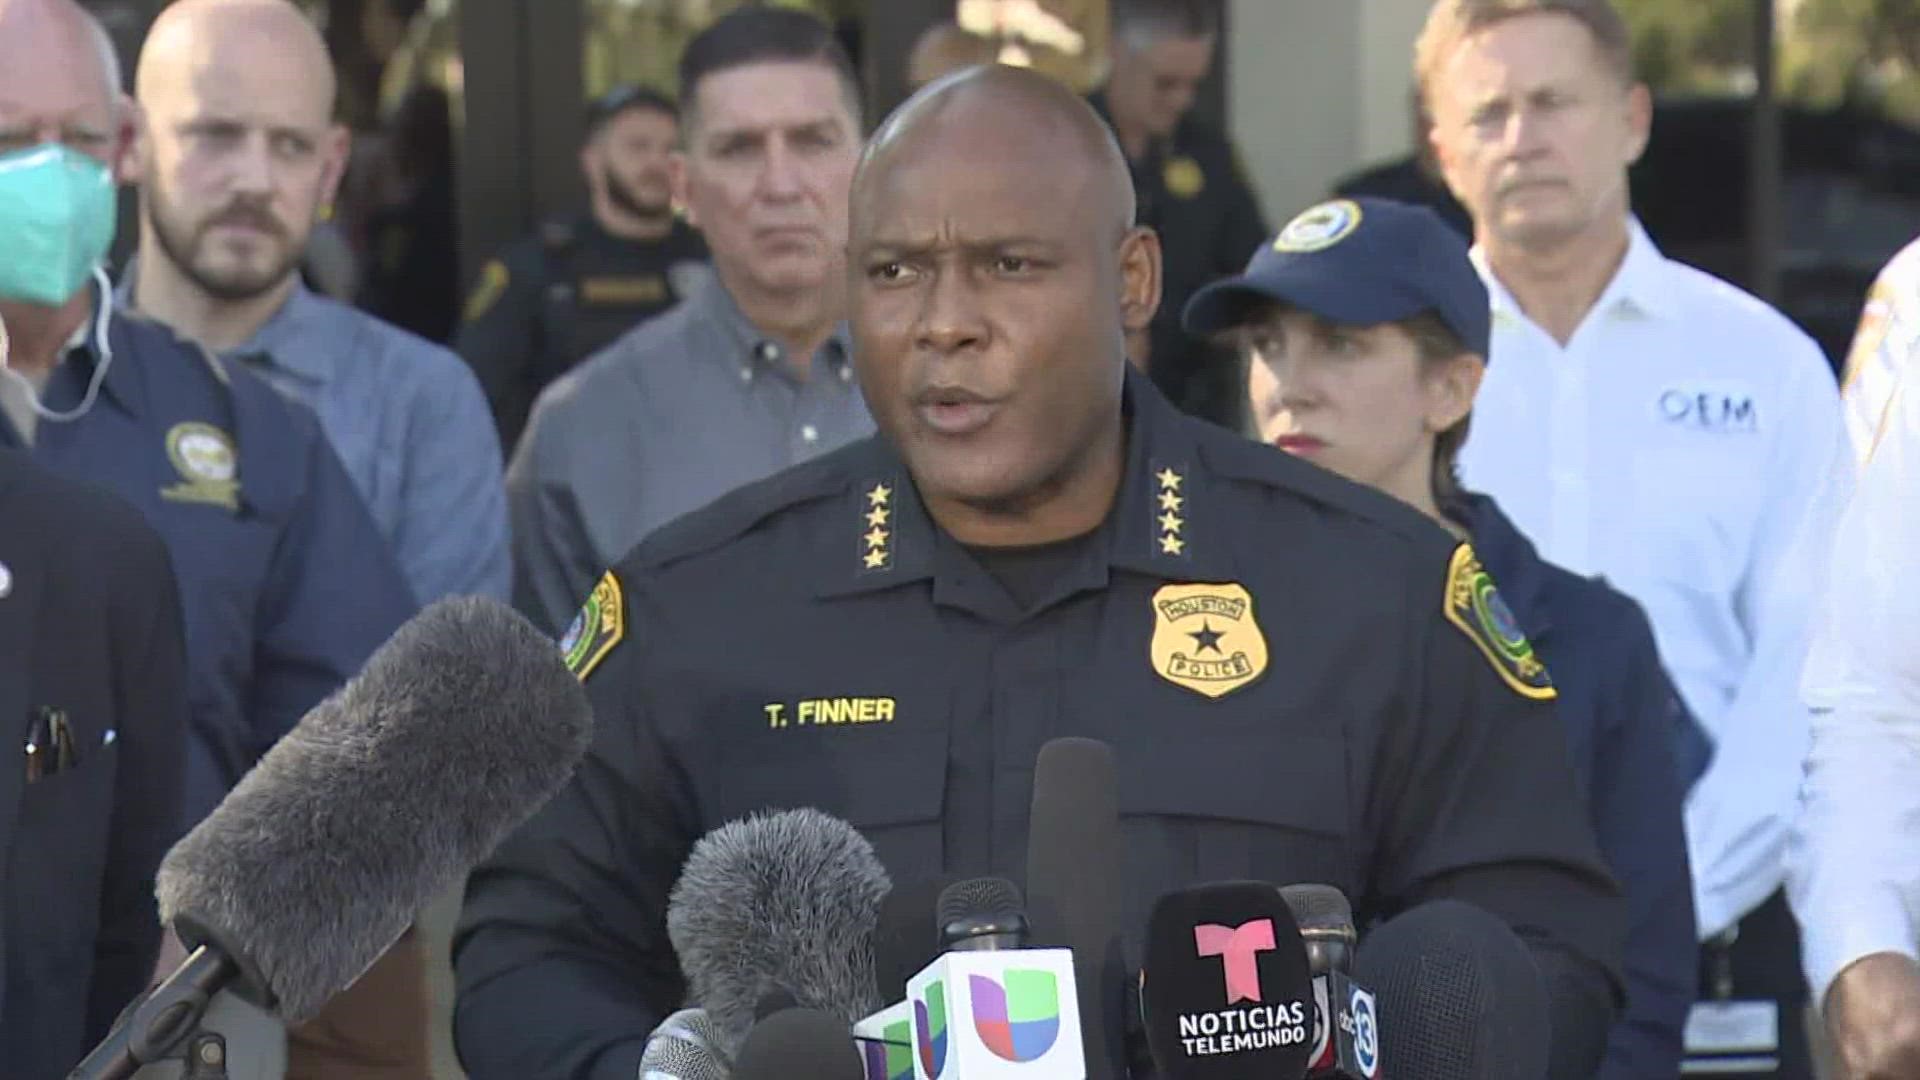 A security guard may have been pricked while trying to grab an attendee before he went unconscious, according to HPD Chief Troy Finner.